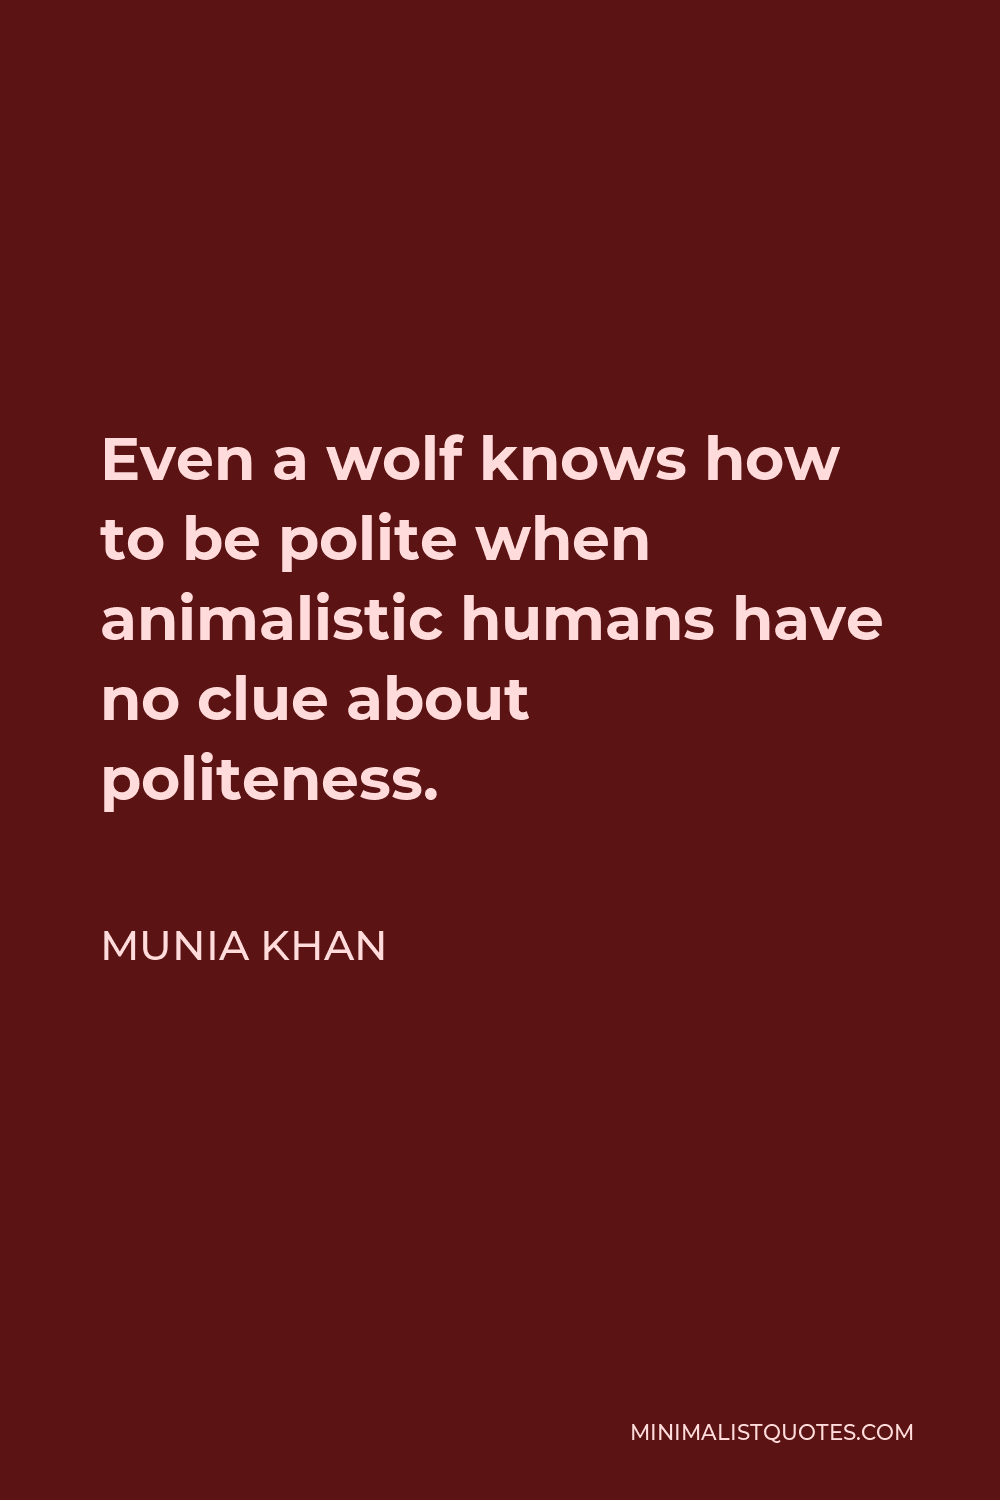 Munia Khan Quote - Even a wolf knows how to be polite when animalistic humans have no clue about politeness.